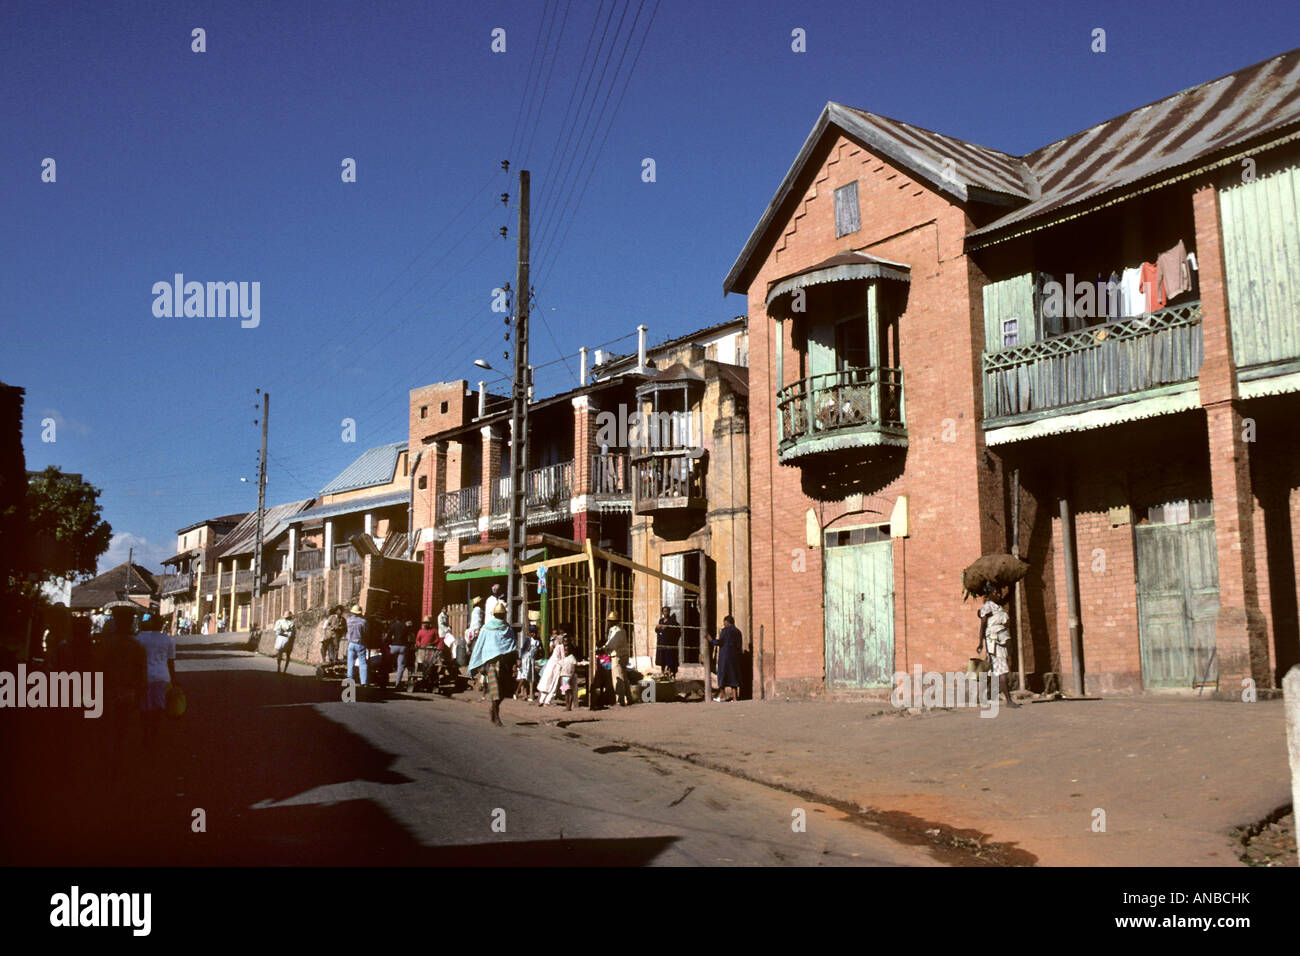 Street scene in Ambositra showing a row of houses and people walking down the street Stock Photo